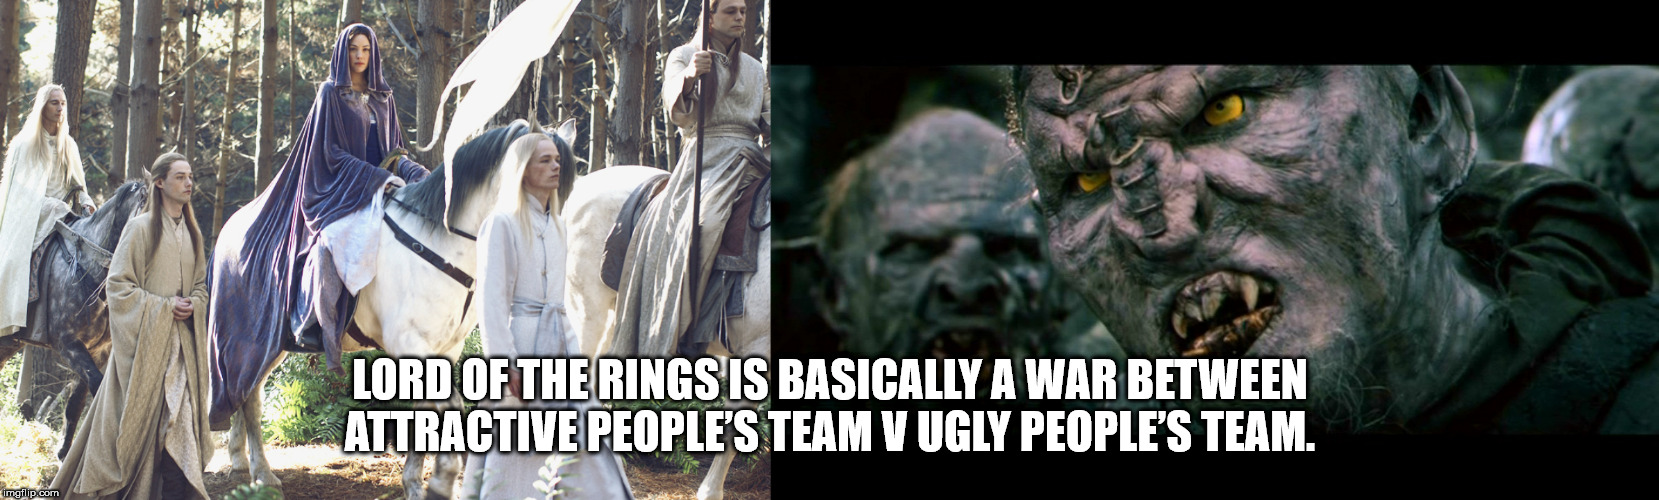 lord of the rings high elves - Lord Of The Rings Is Basically A War Between Attractive People'S Team V Ugly People'S Team. imgflip.com